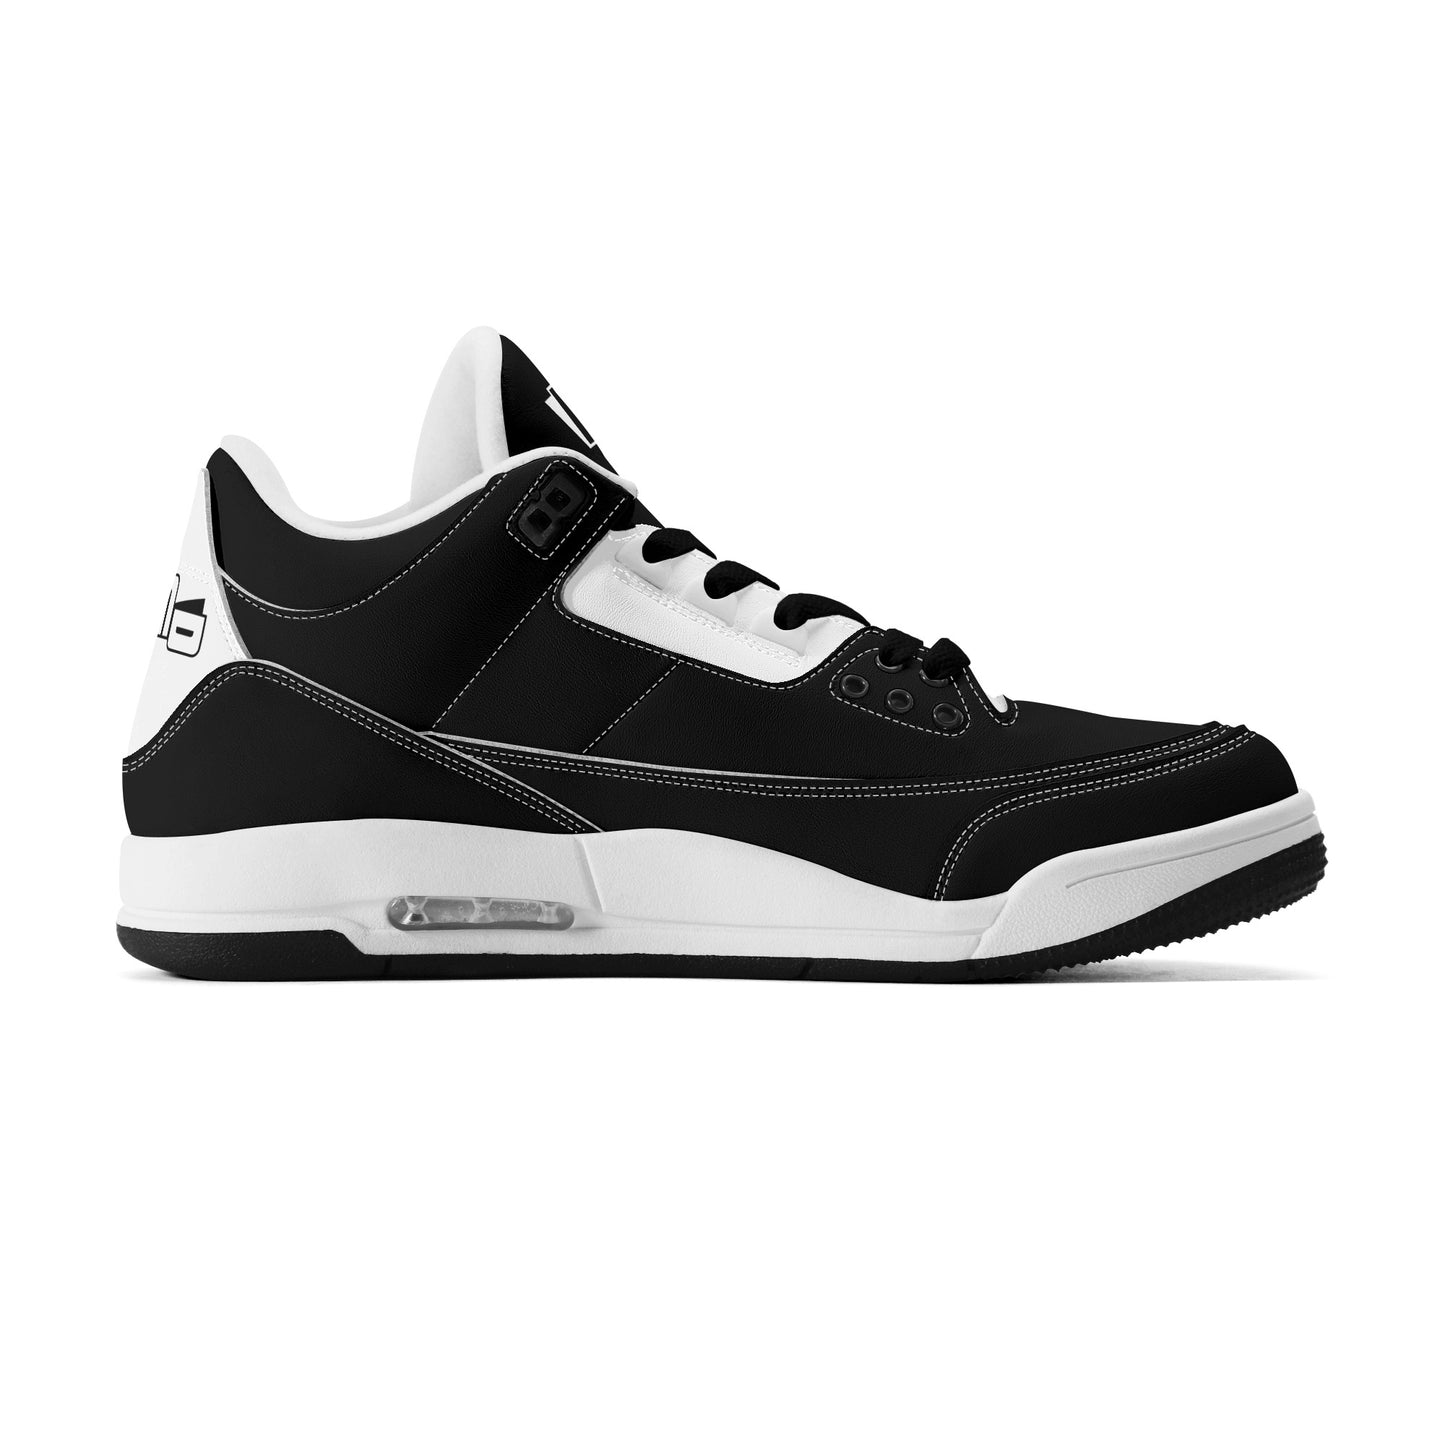 DJMD Mens High Top Retro Leather Basketball Sneakers-A5